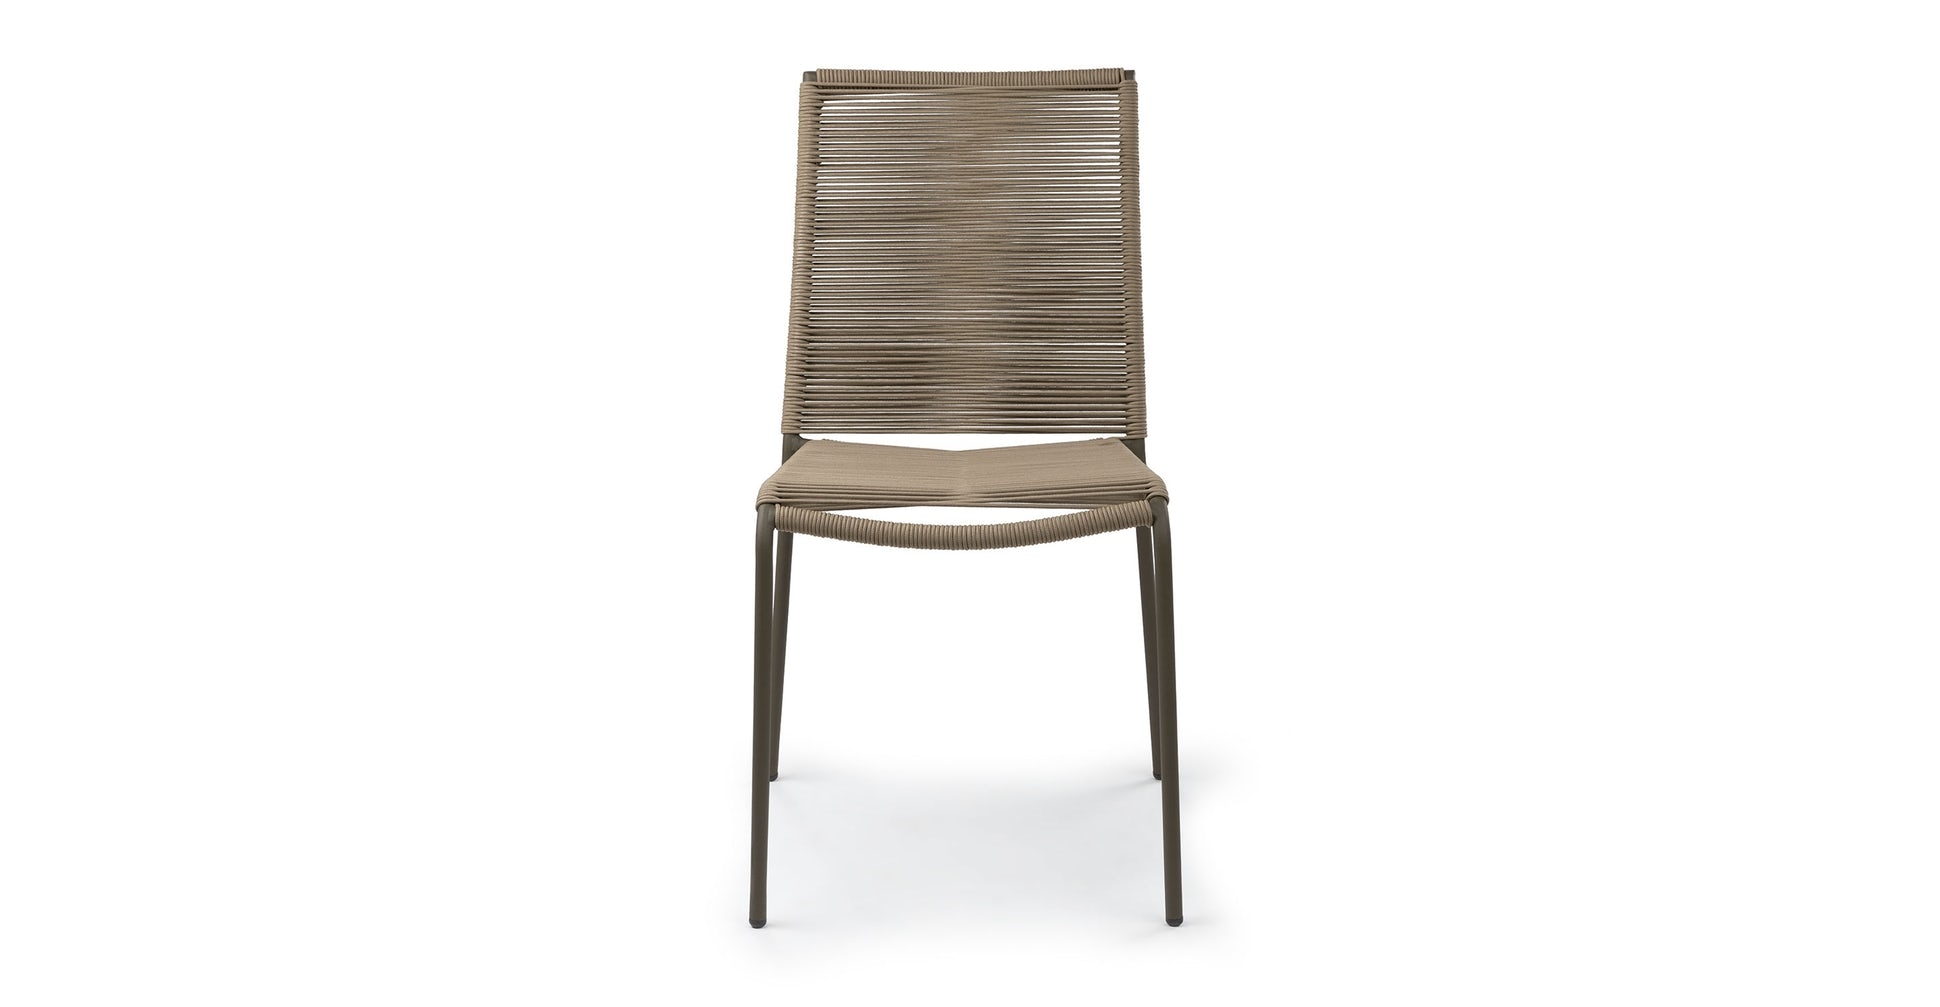 Zina Grove Green Dining Chair - Image 2